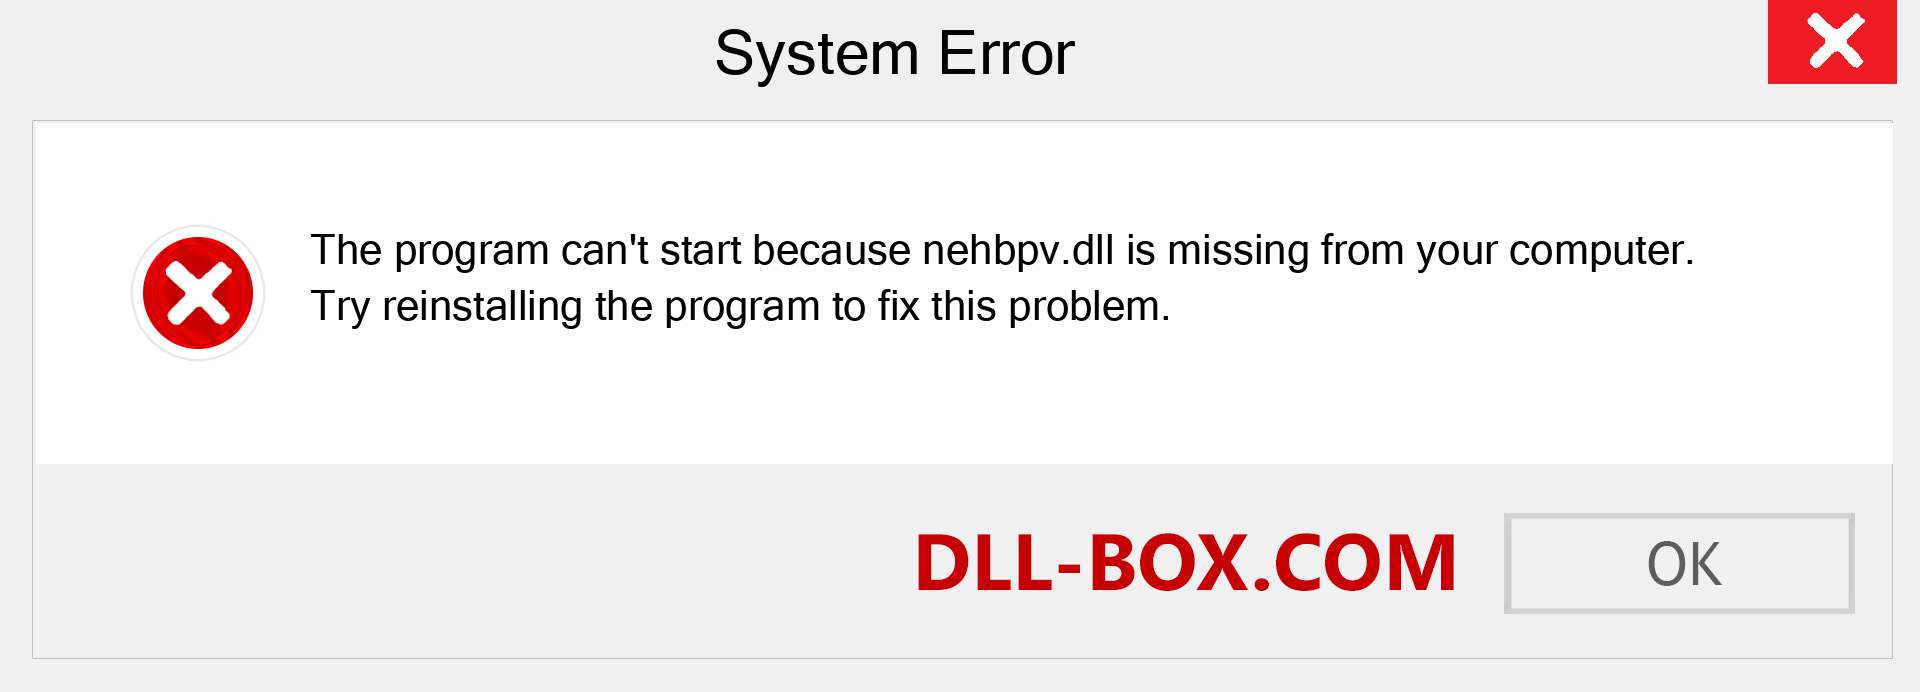  nehbpv.dll file is missing?. Download for Windows 7, 8, 10 - Fix  nehbpv dll Missing Error on Windows, photos, images